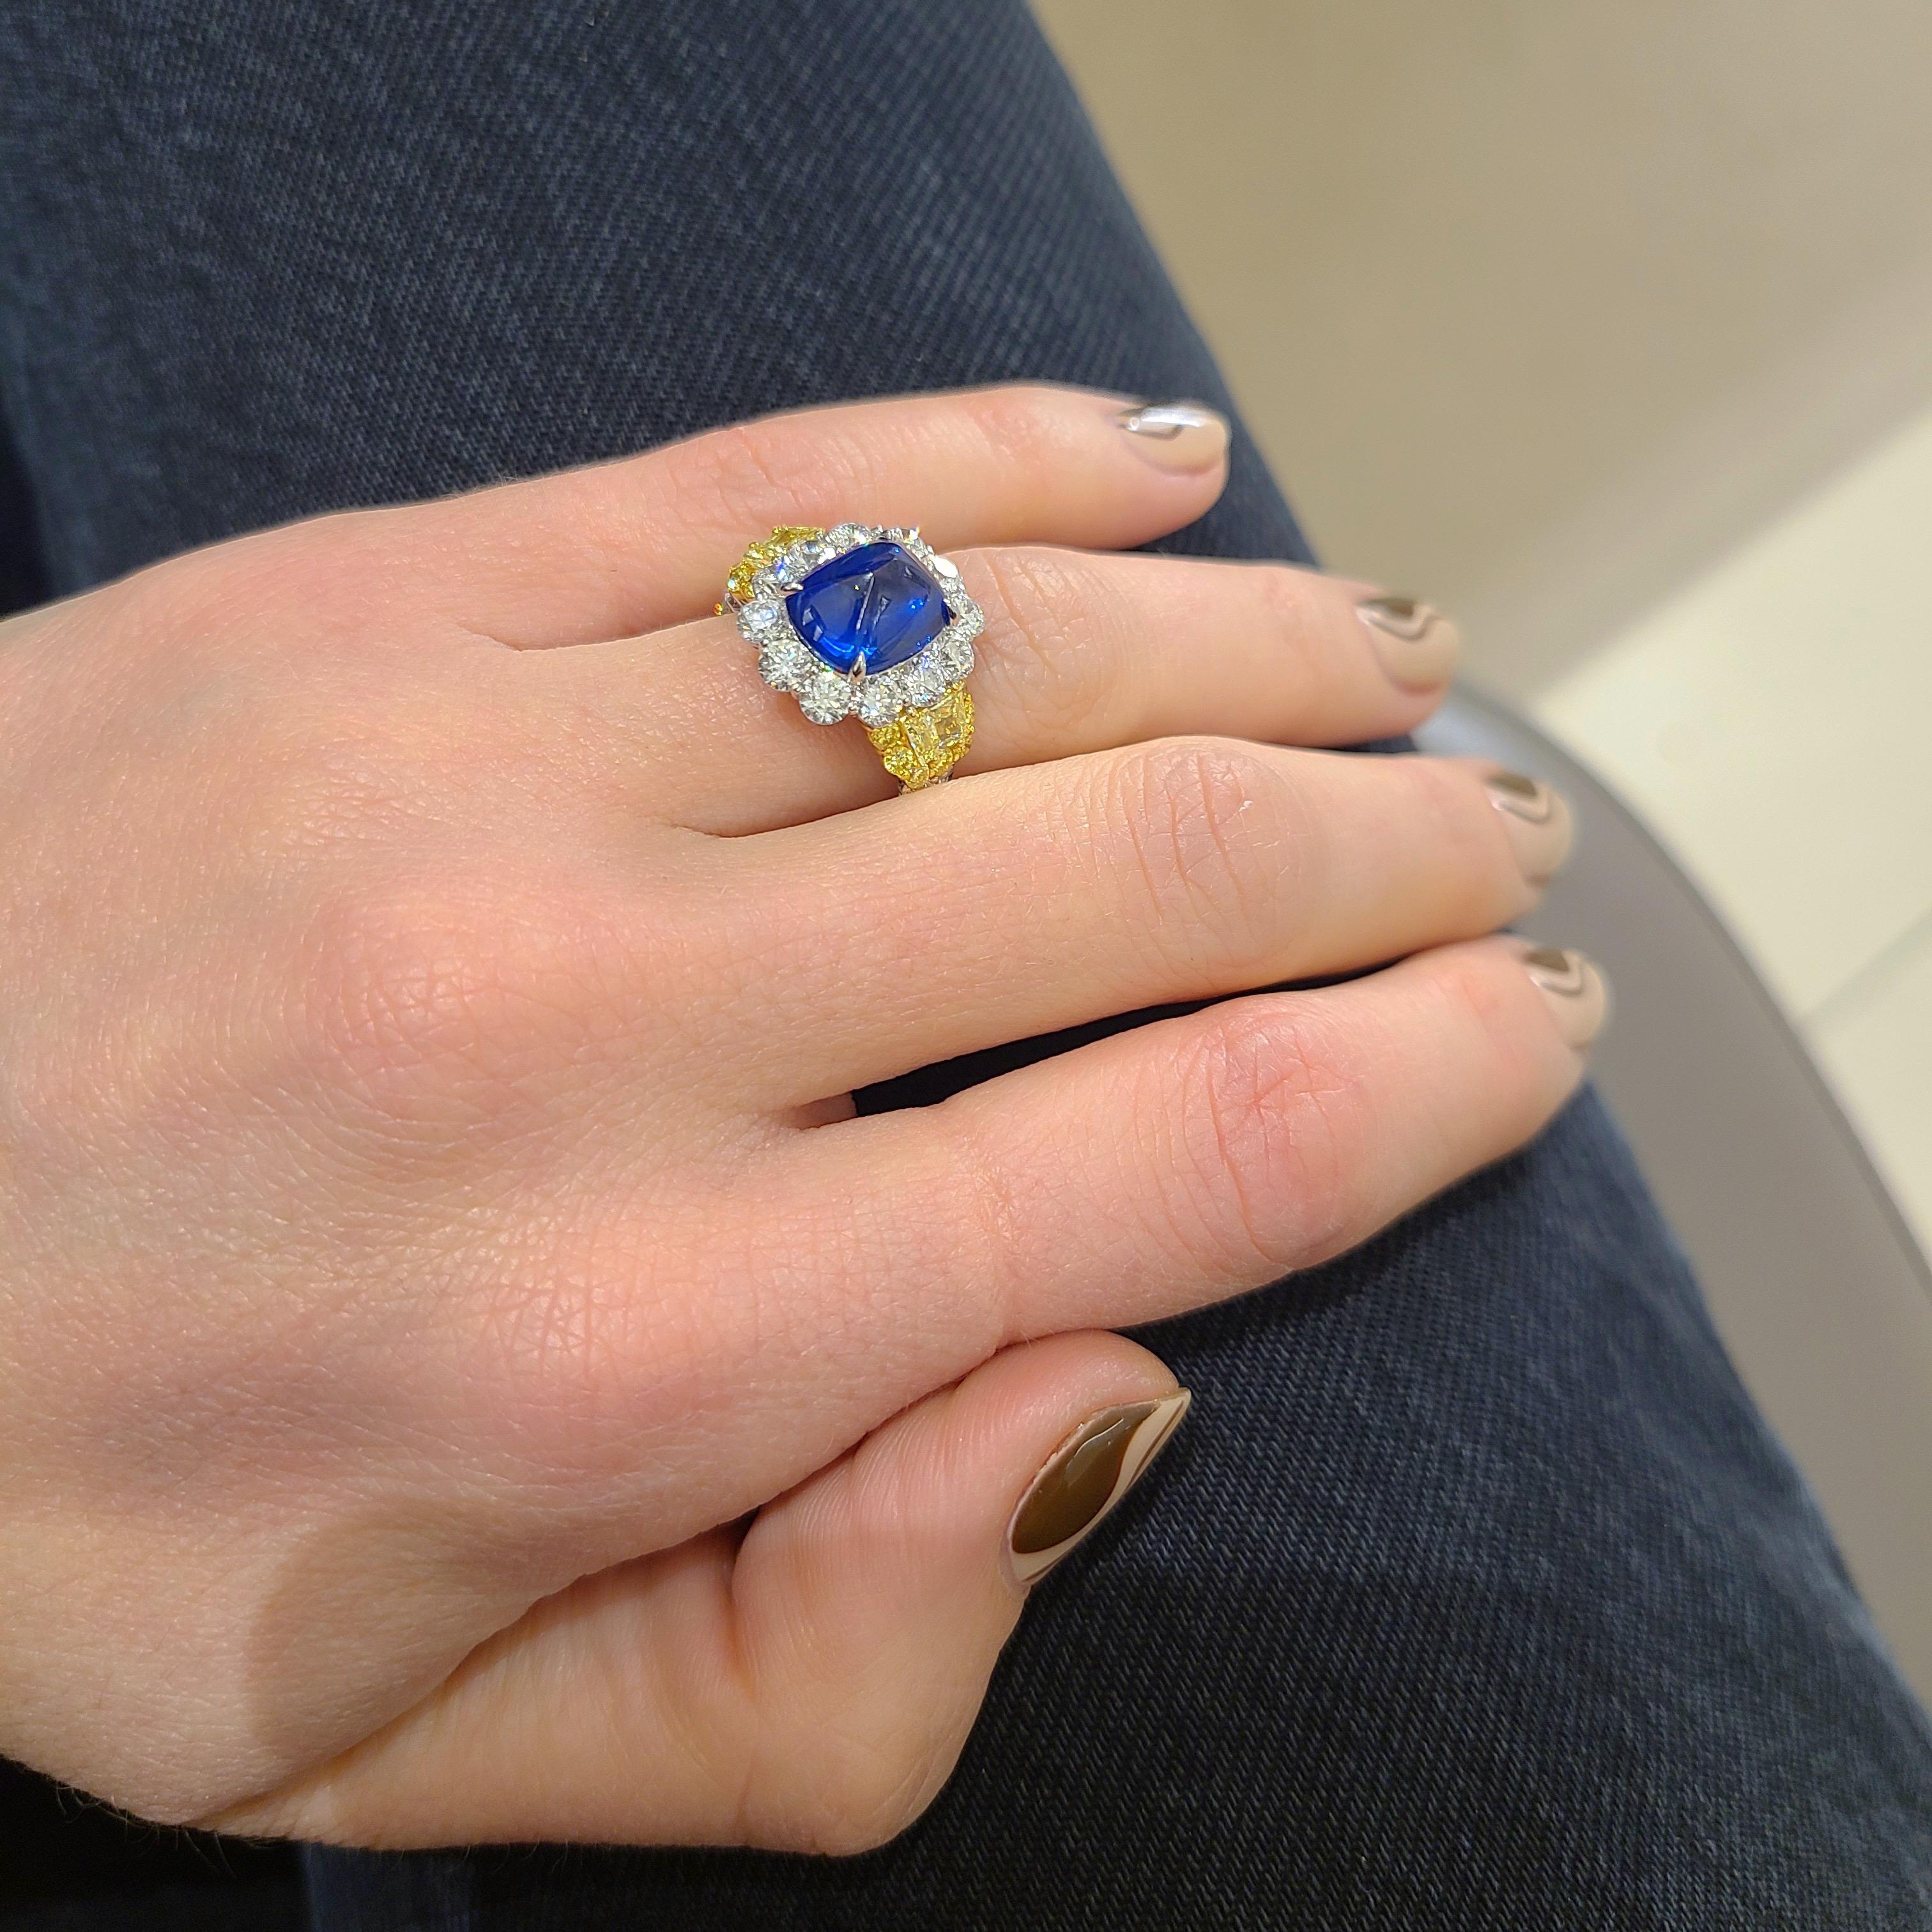 Cellini Plat/18KT 4.27Ct. Sugarloaf Sapphire, Fancy Yellow & White Diamond Ring For Sale 5